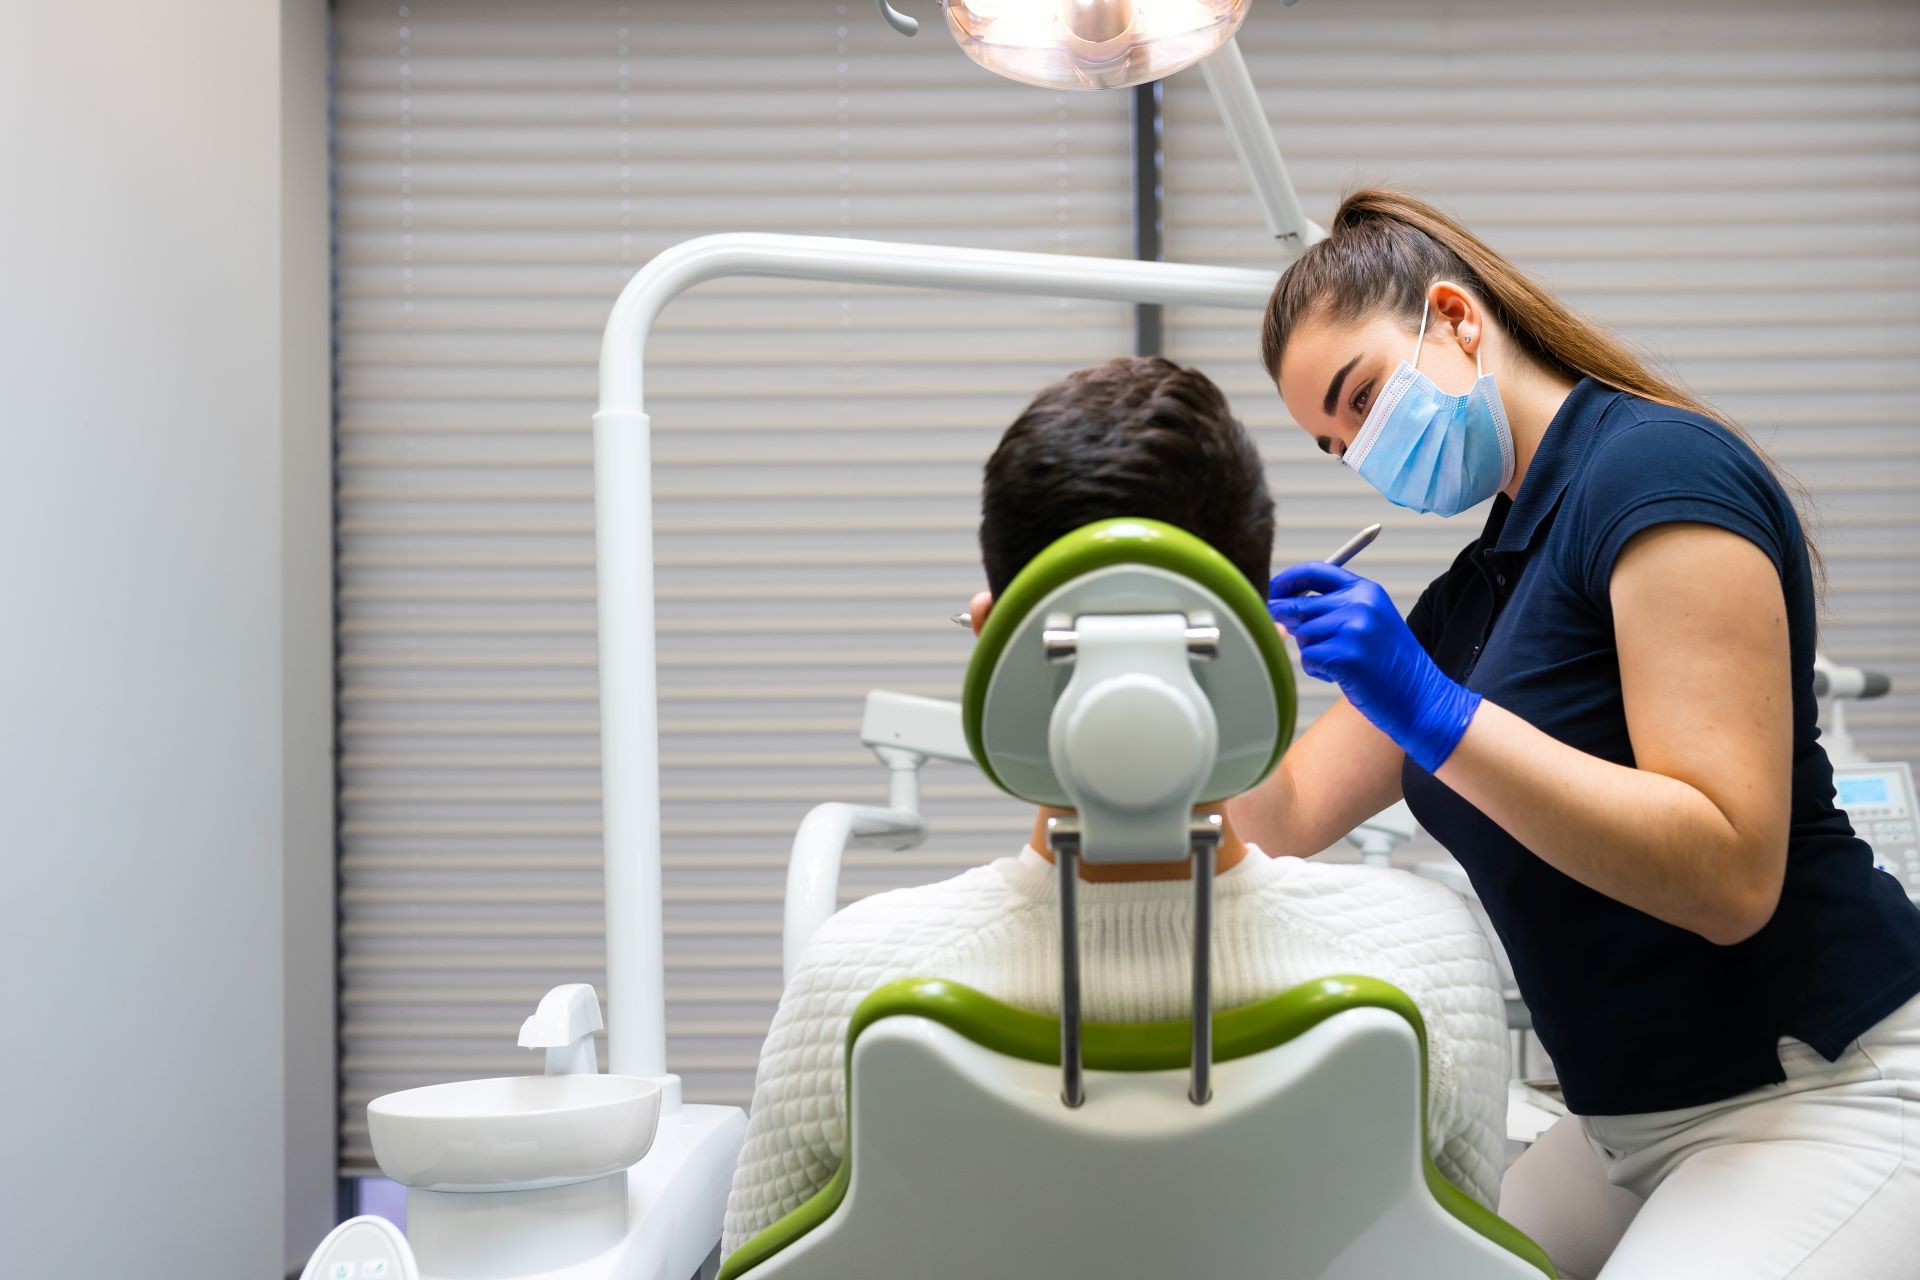 Man at dental check-up in chair with back towards us, while woman dental professional examines teeth